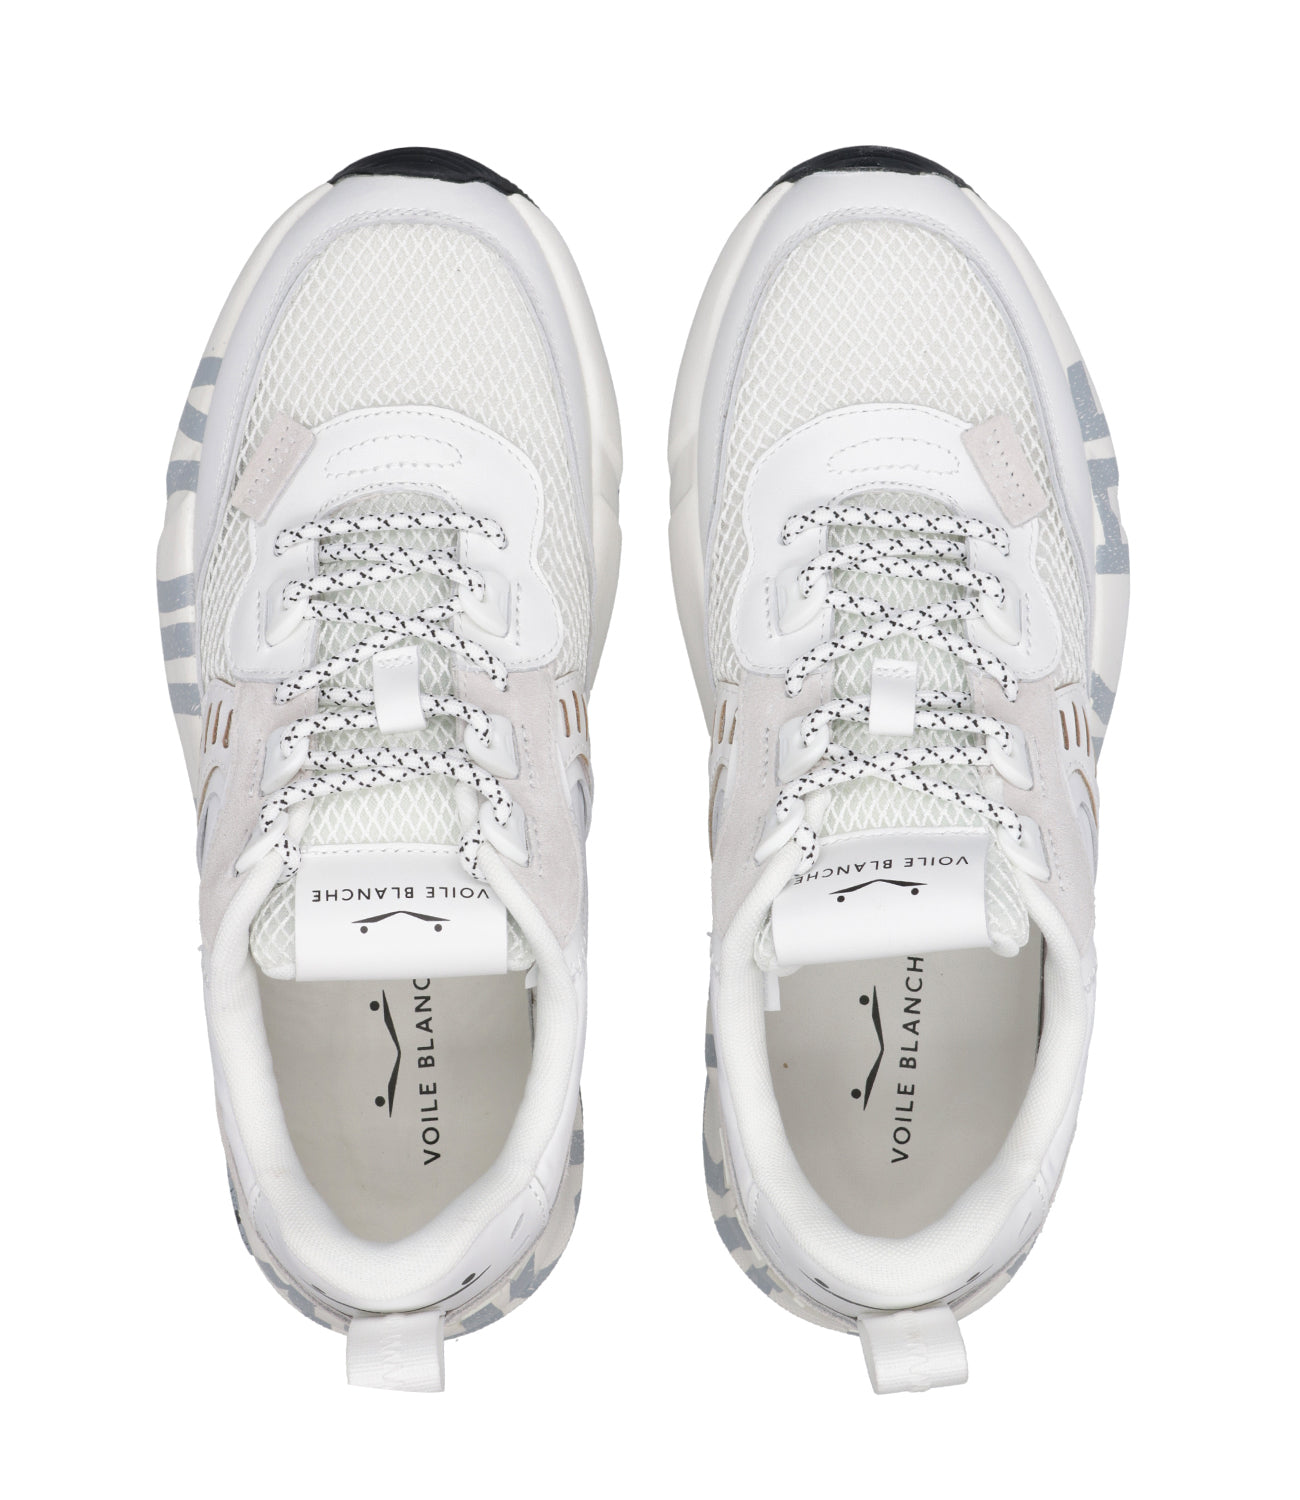 Voile Blanche | Sneakers Club01 White